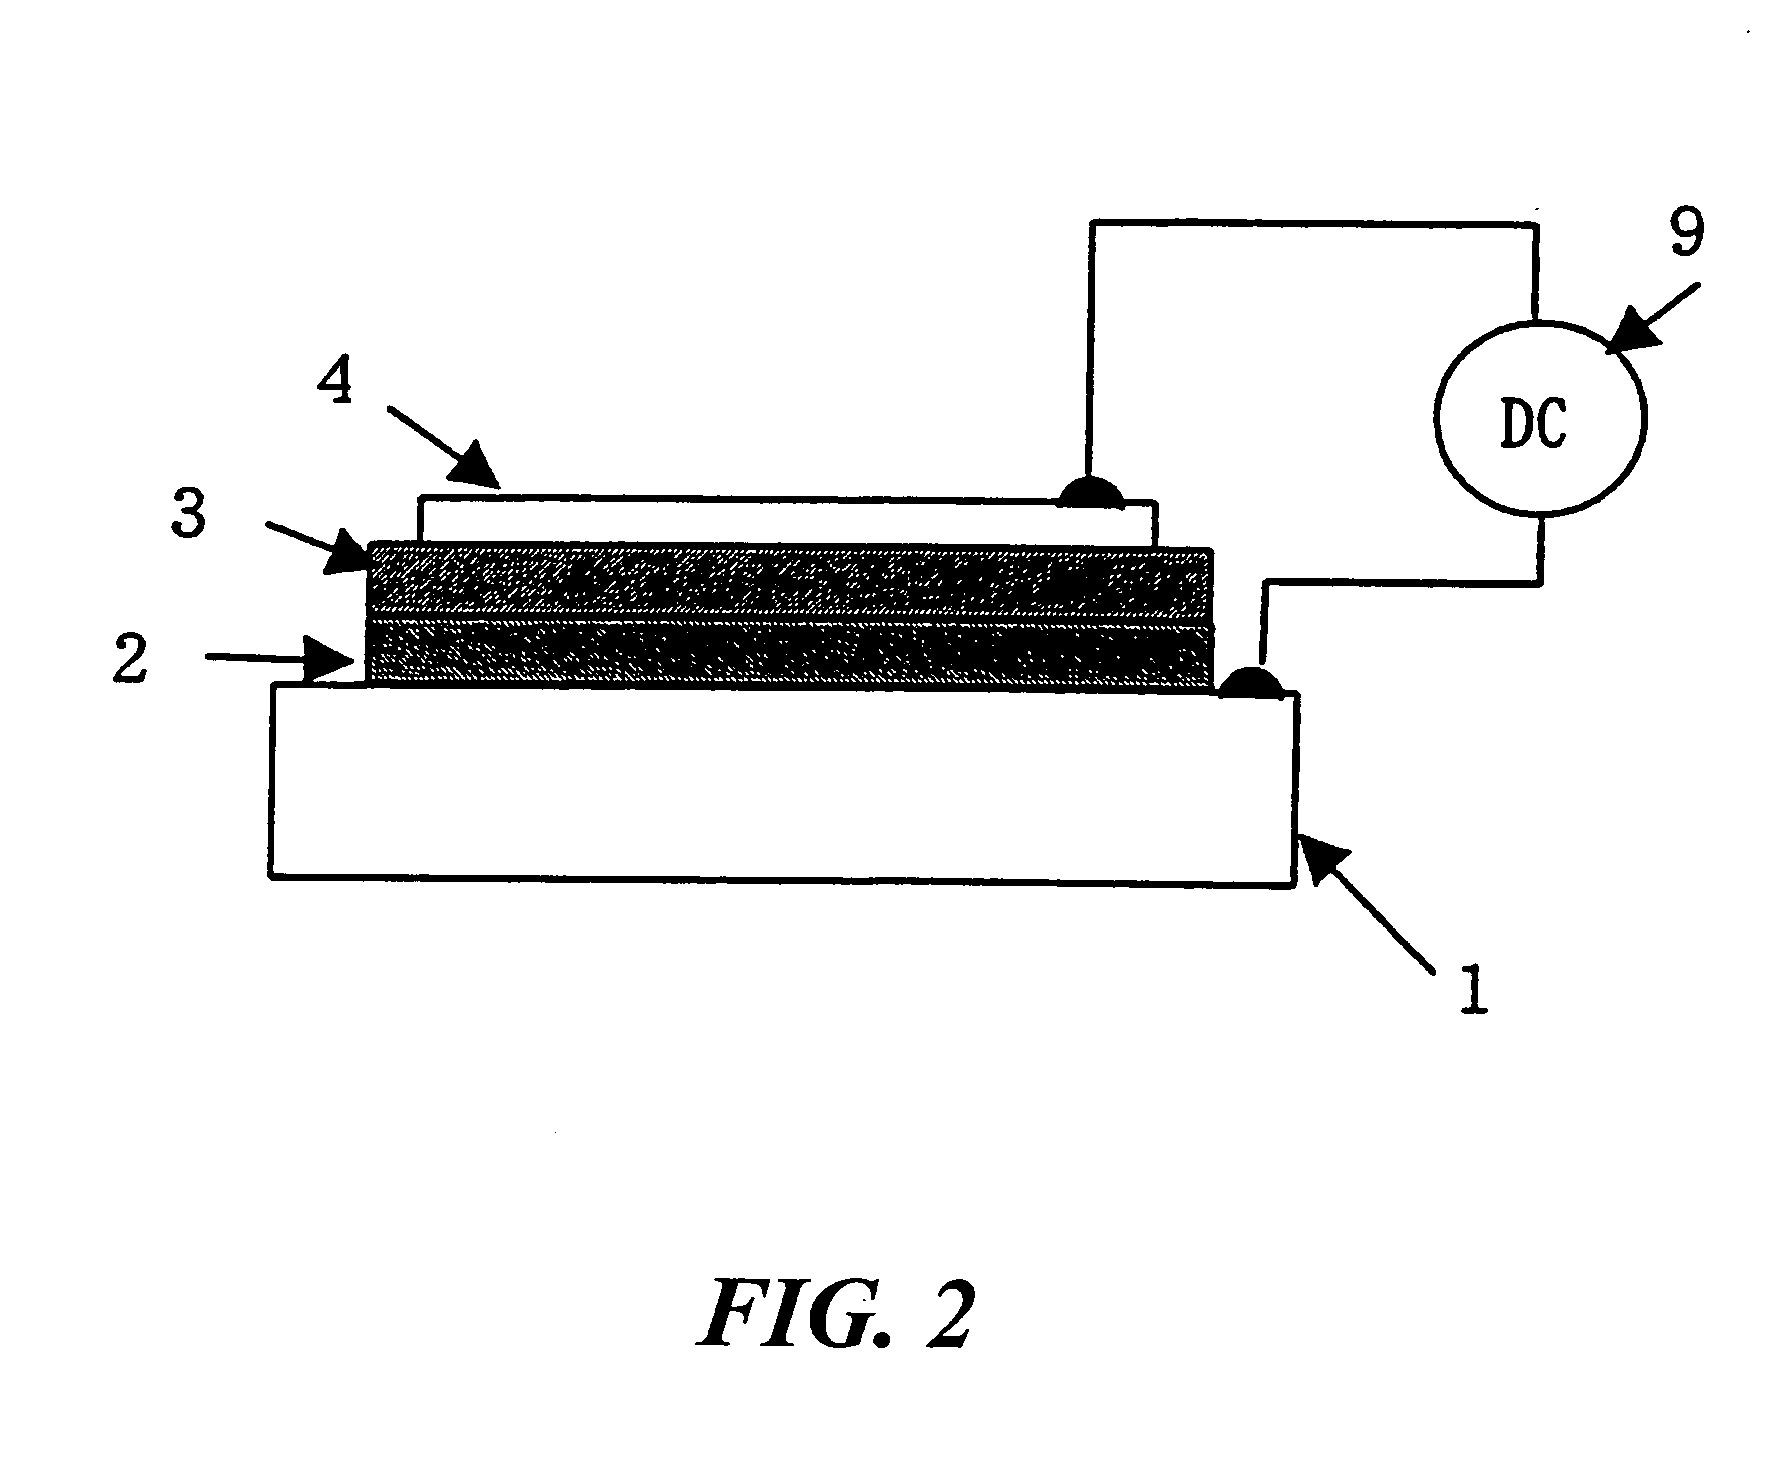 Inorganic electroluminescence device driven by direct current